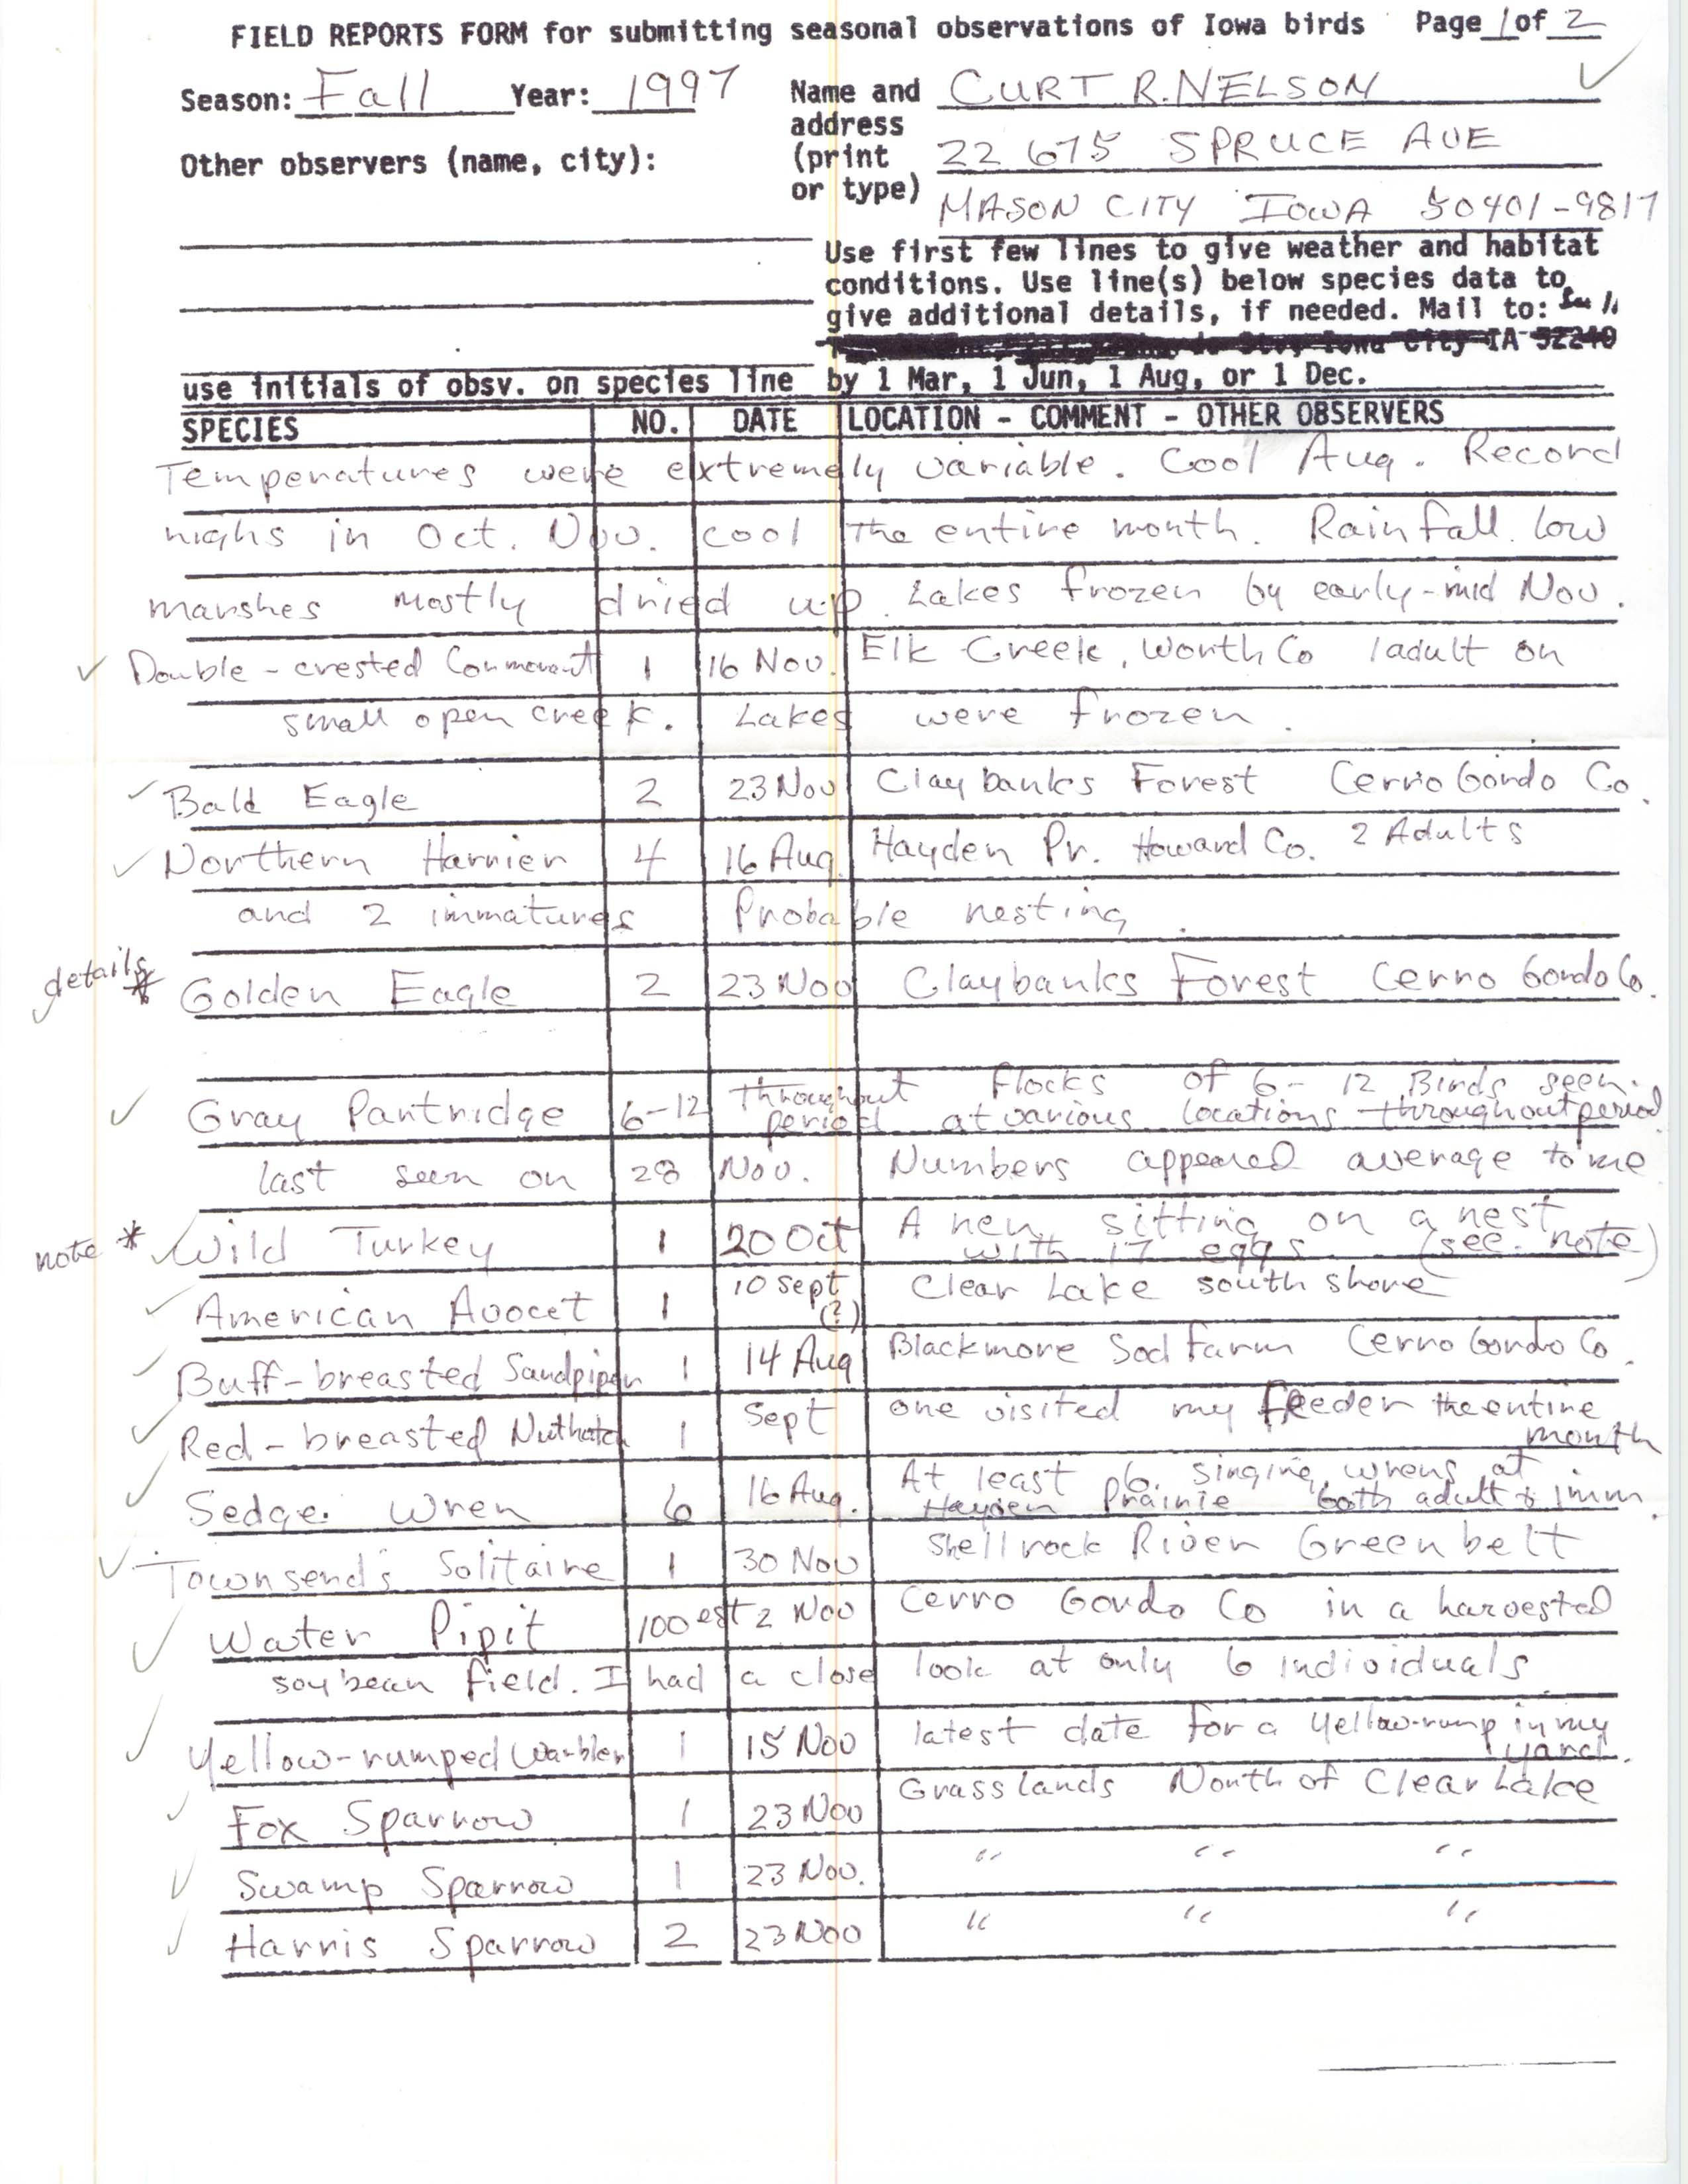 Field reports form for submitting seasonal observations of Iowa birds, Curtis Nelson, fall 1997